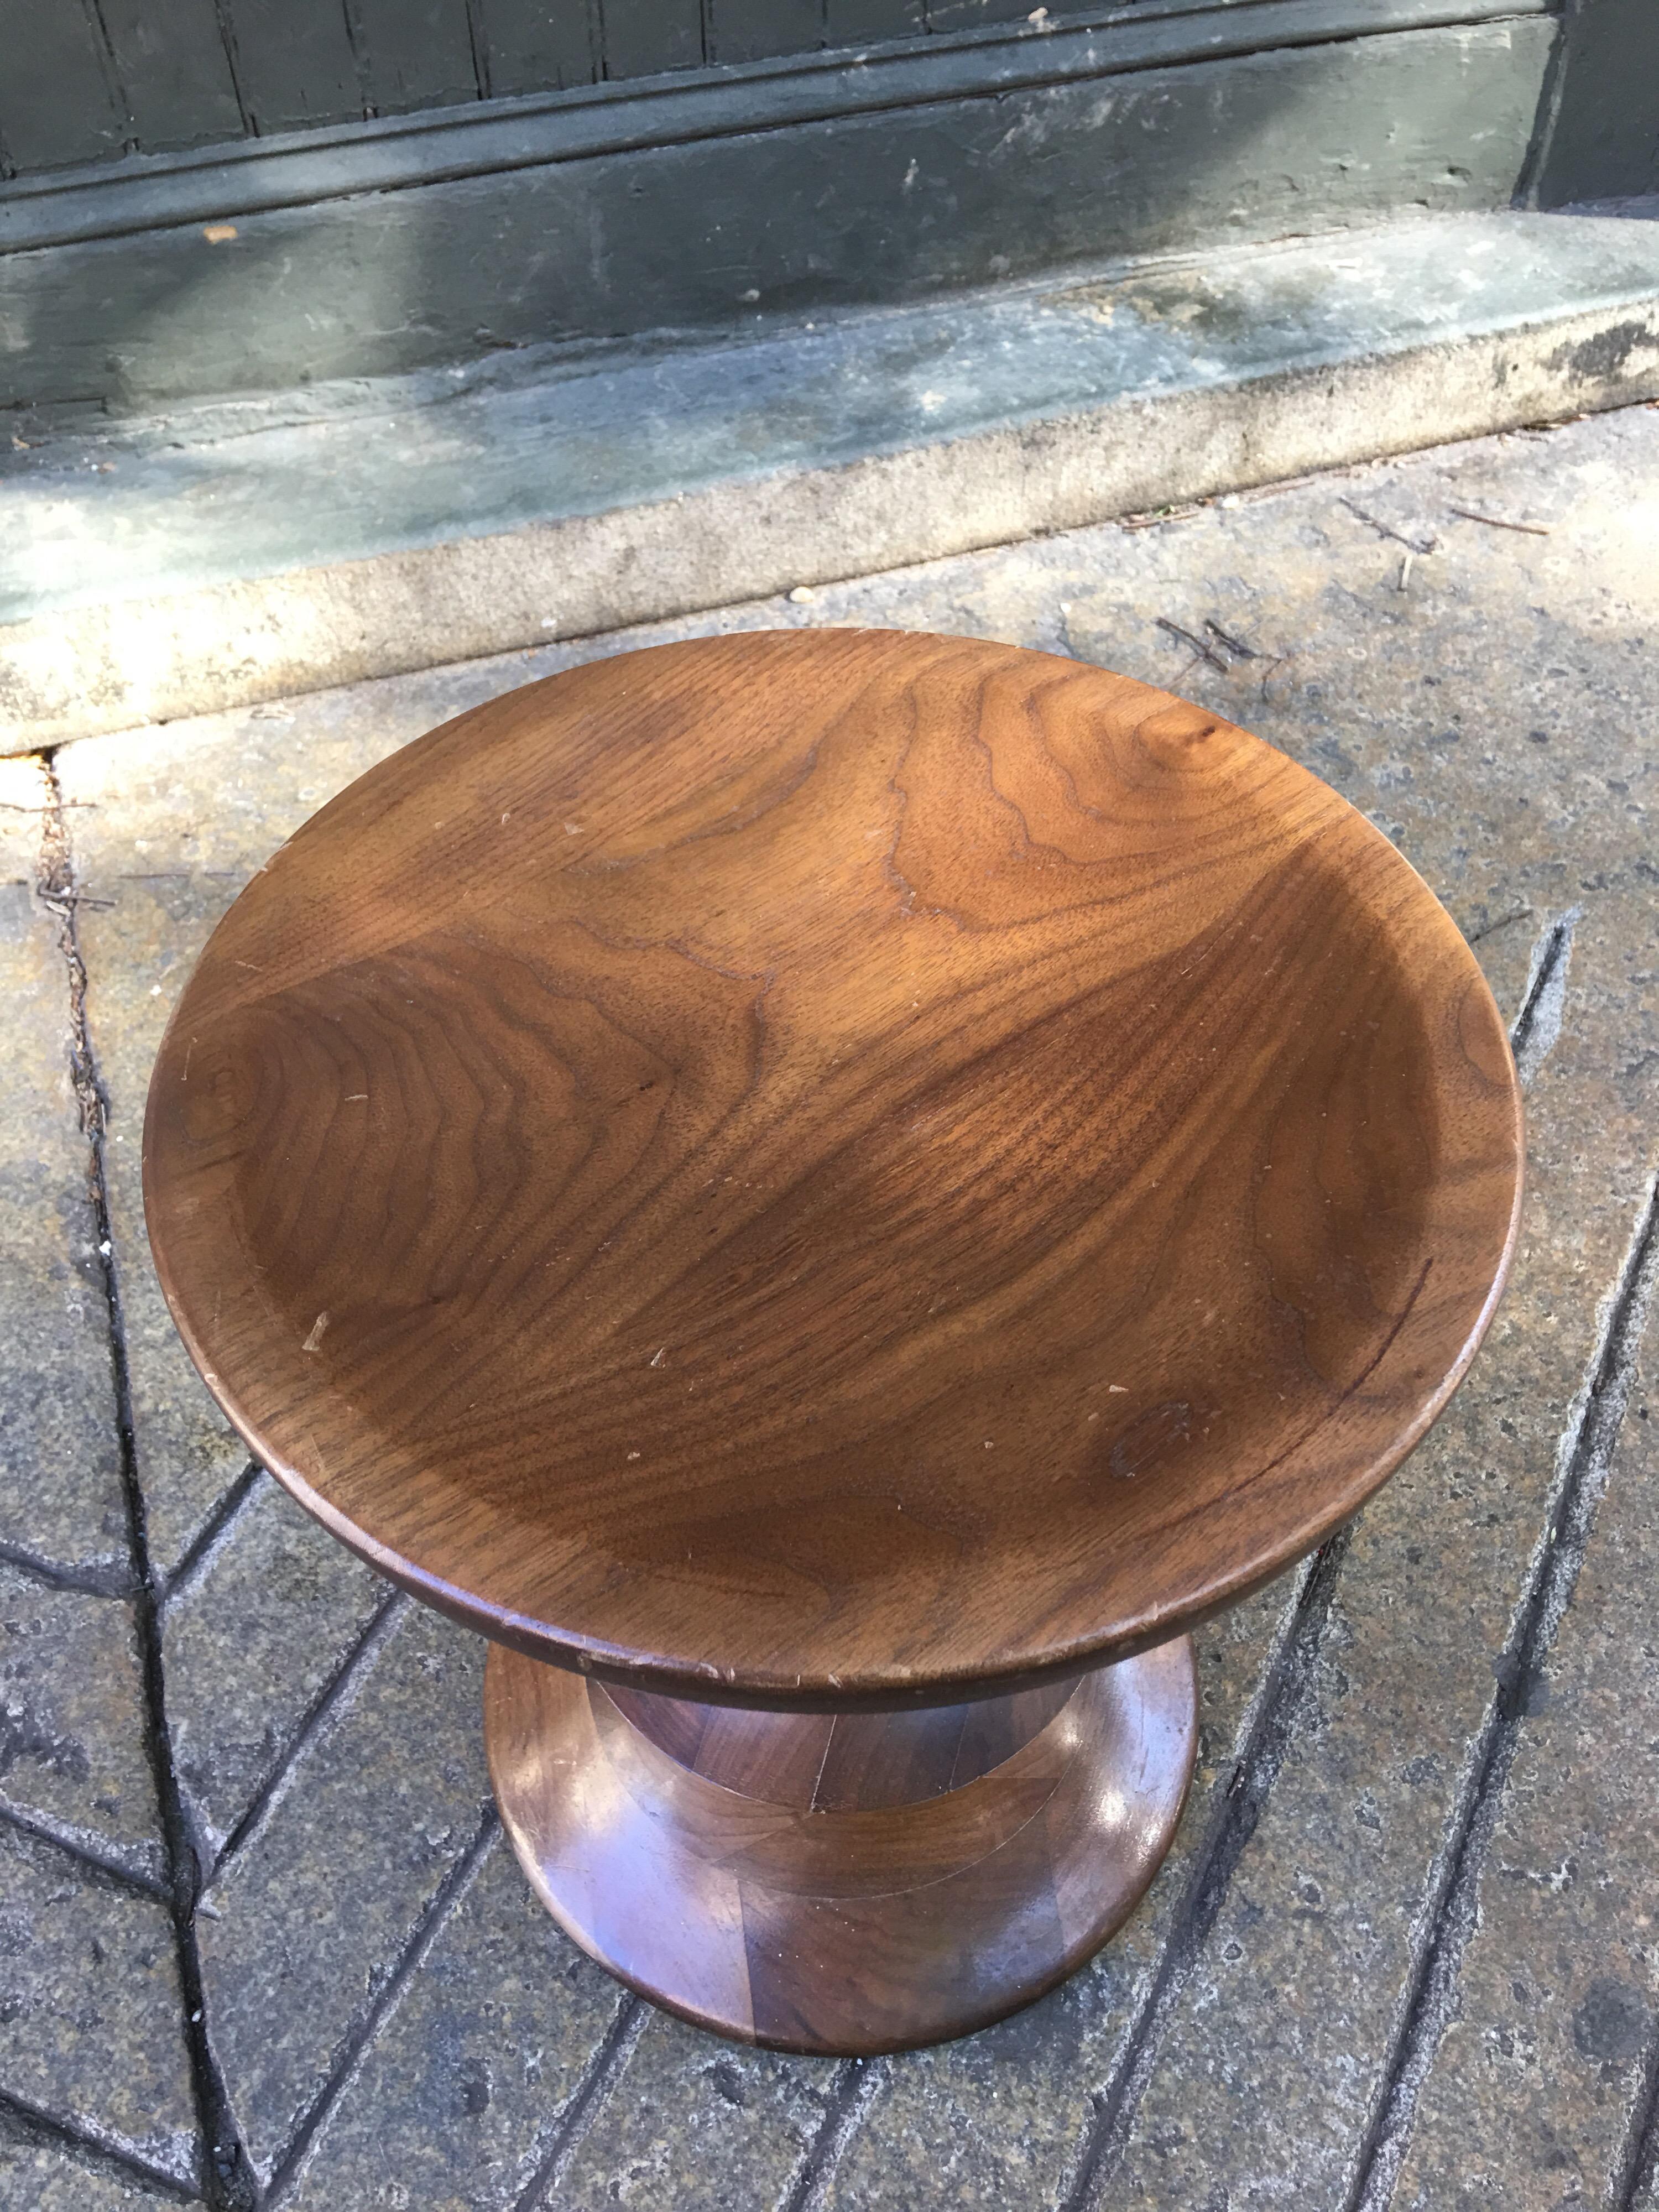 Eames time life Herman Miller walnut stool in shape C. Designed in 1959 for the Time Life Corporation, We sold this stool originally as Herman Miller dealers for 20 years and was one of our first sales. We have bought it back form the original